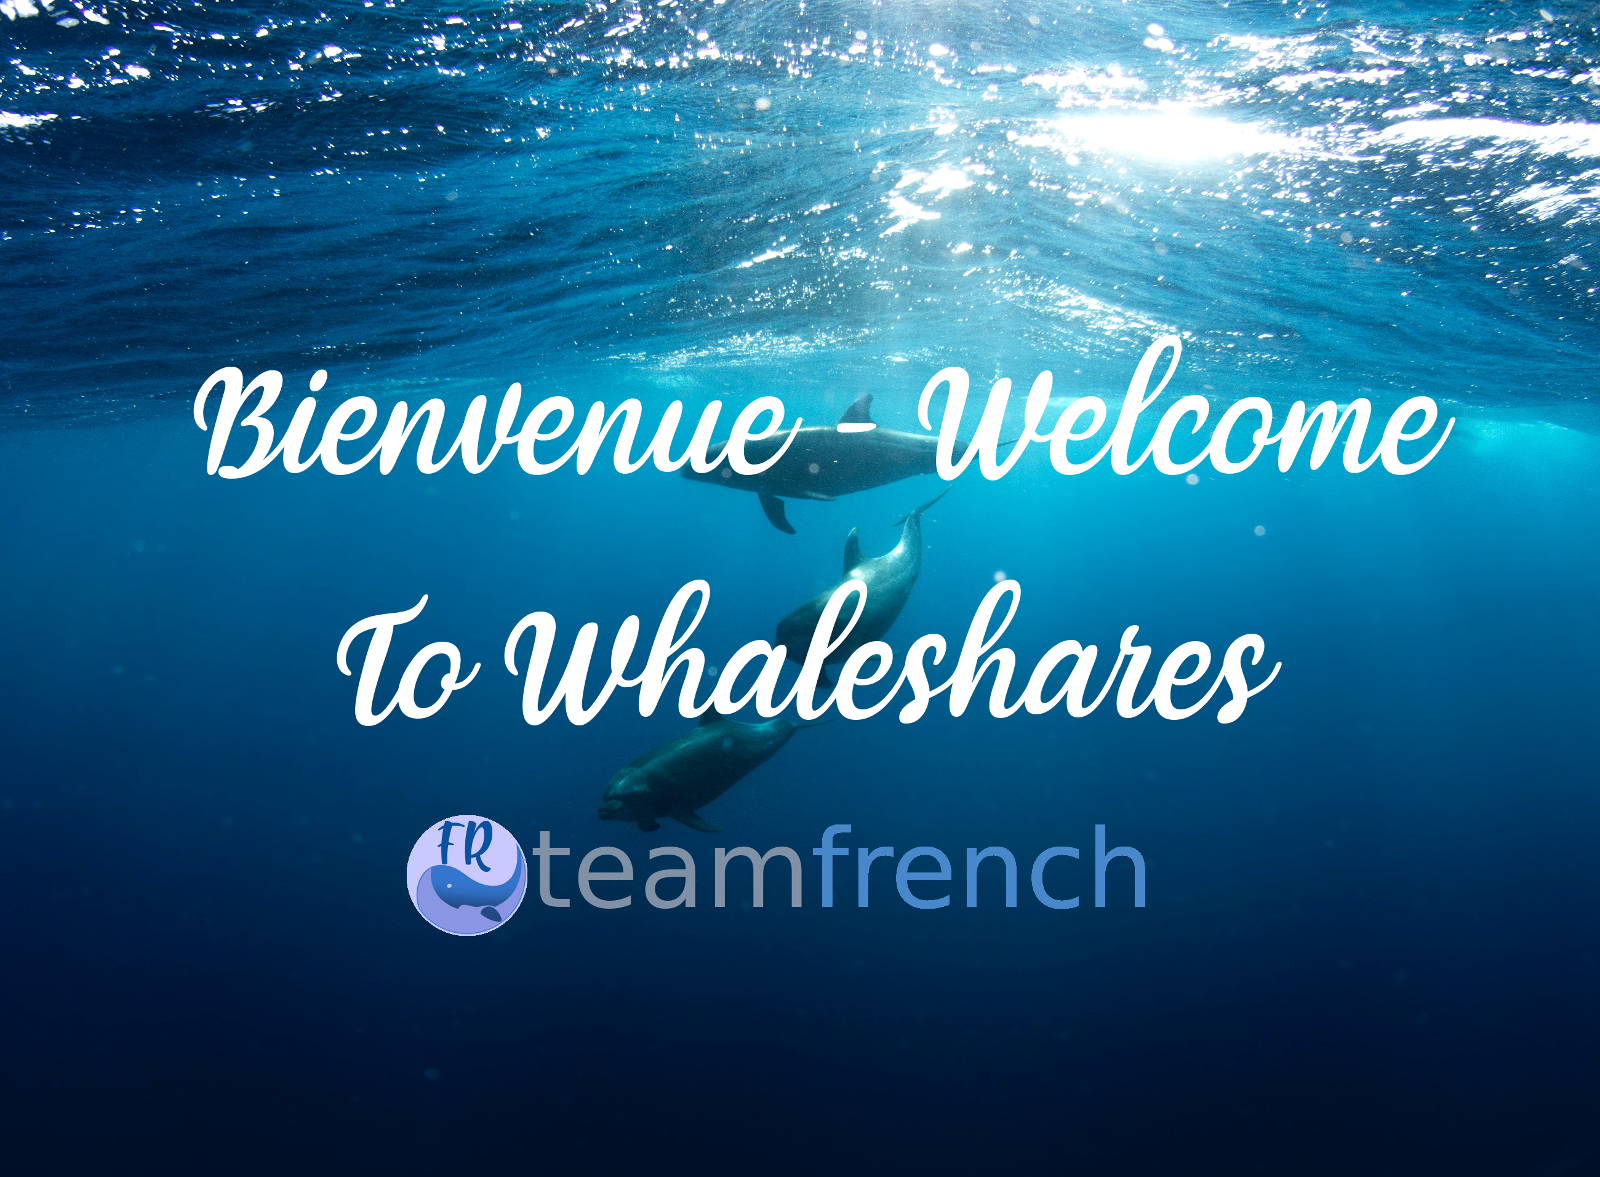 teamfrench-welcome-to-wls.jpg